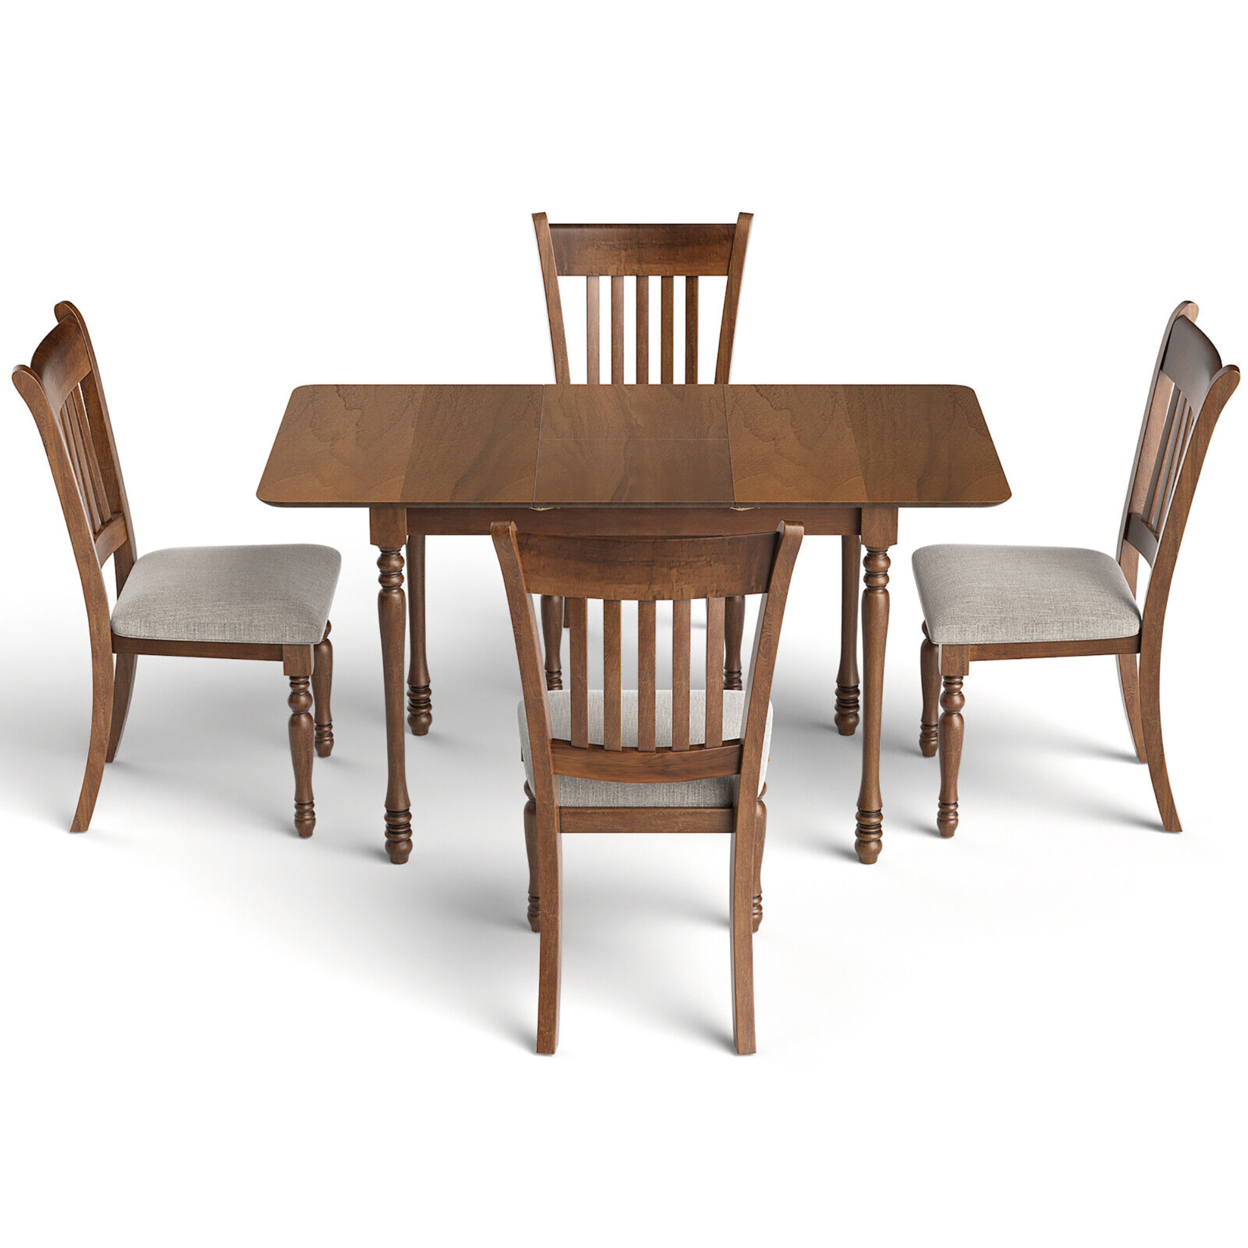 5 PCS Retro Dining Table Set W/ Dining Table & 4 Upholstered Chairs Rustic Brown